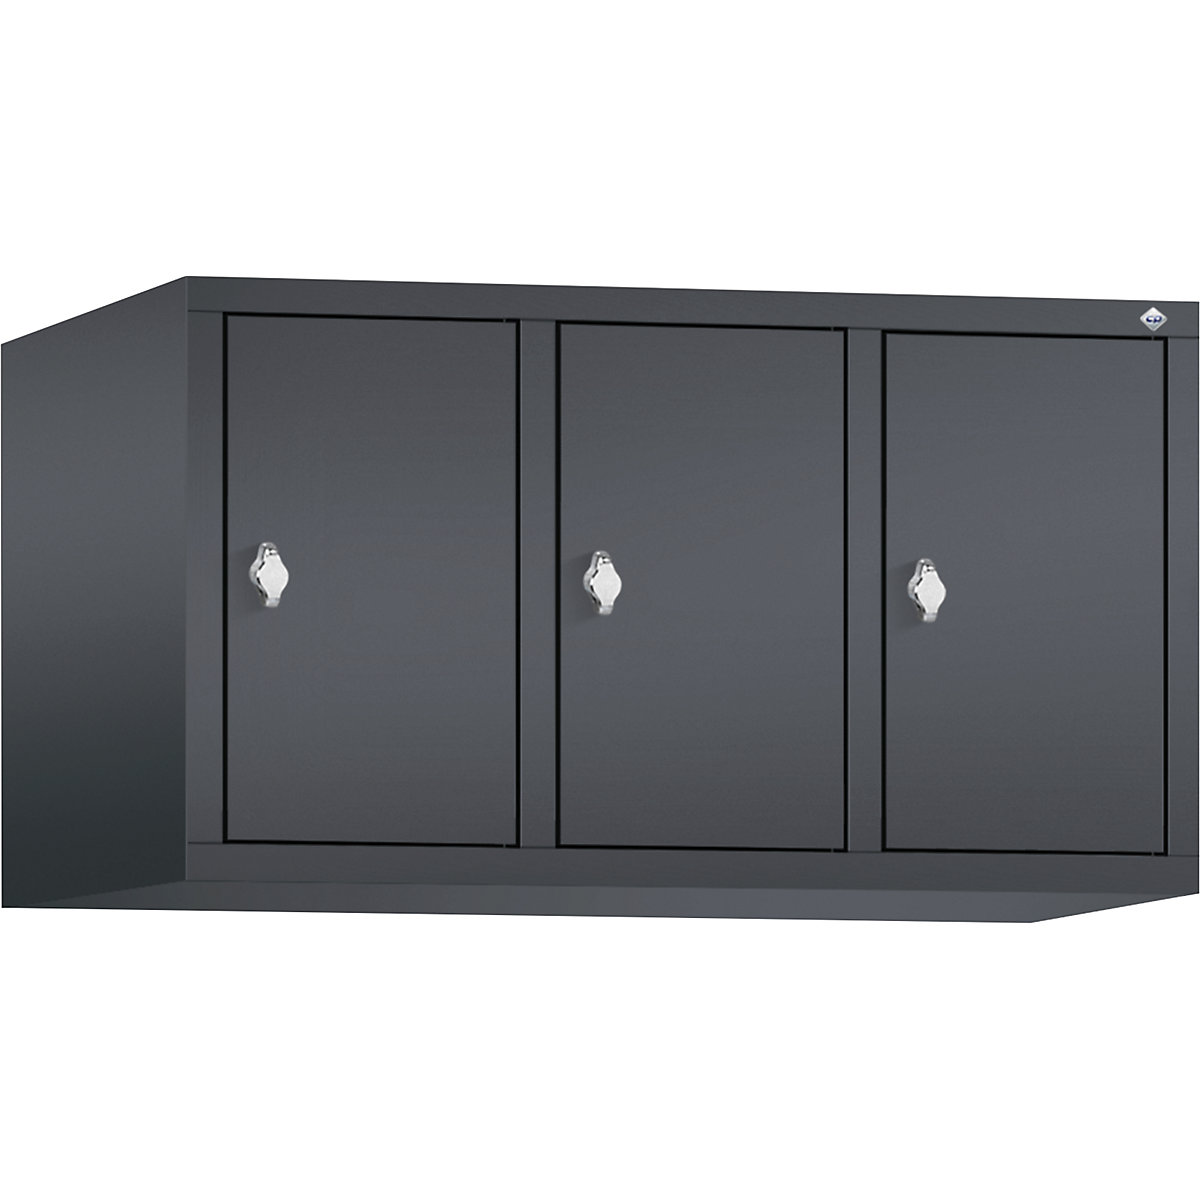 CLASSIC add-on cupboard – C+P, 3 compartments, compartment width 300 mm, black grey-5